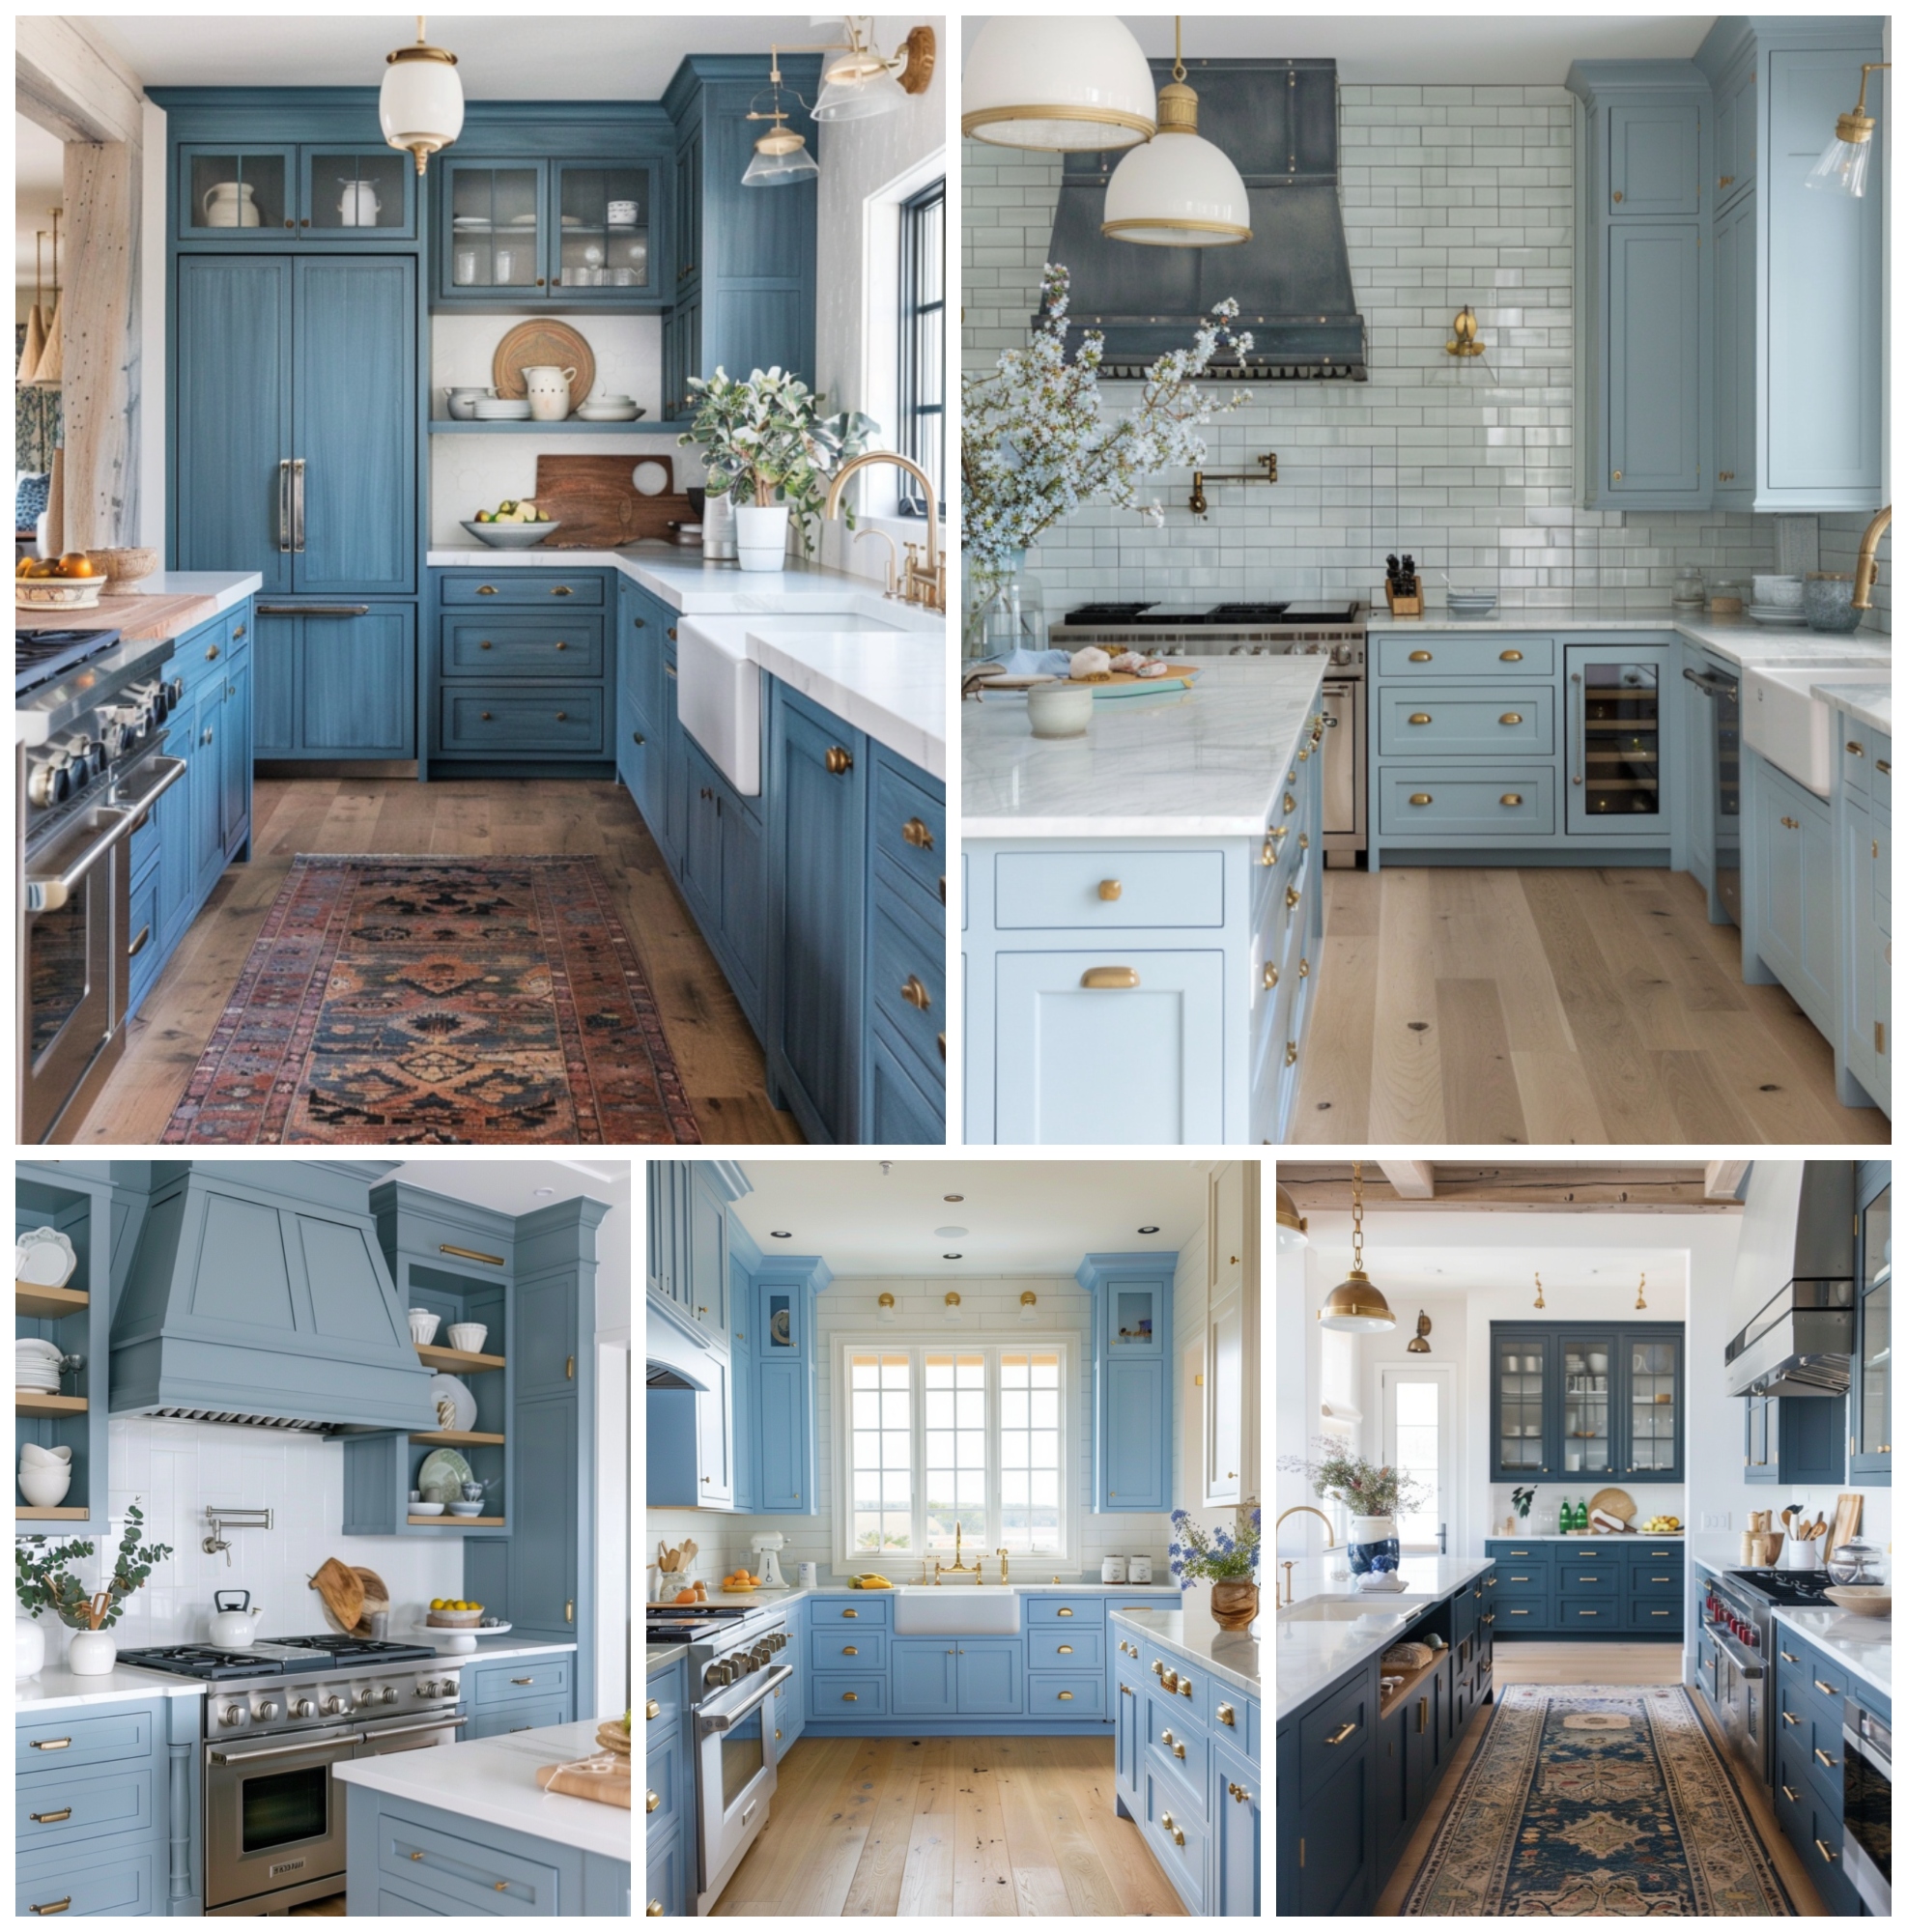 Vibrant Kitchens With Blue Cabinets